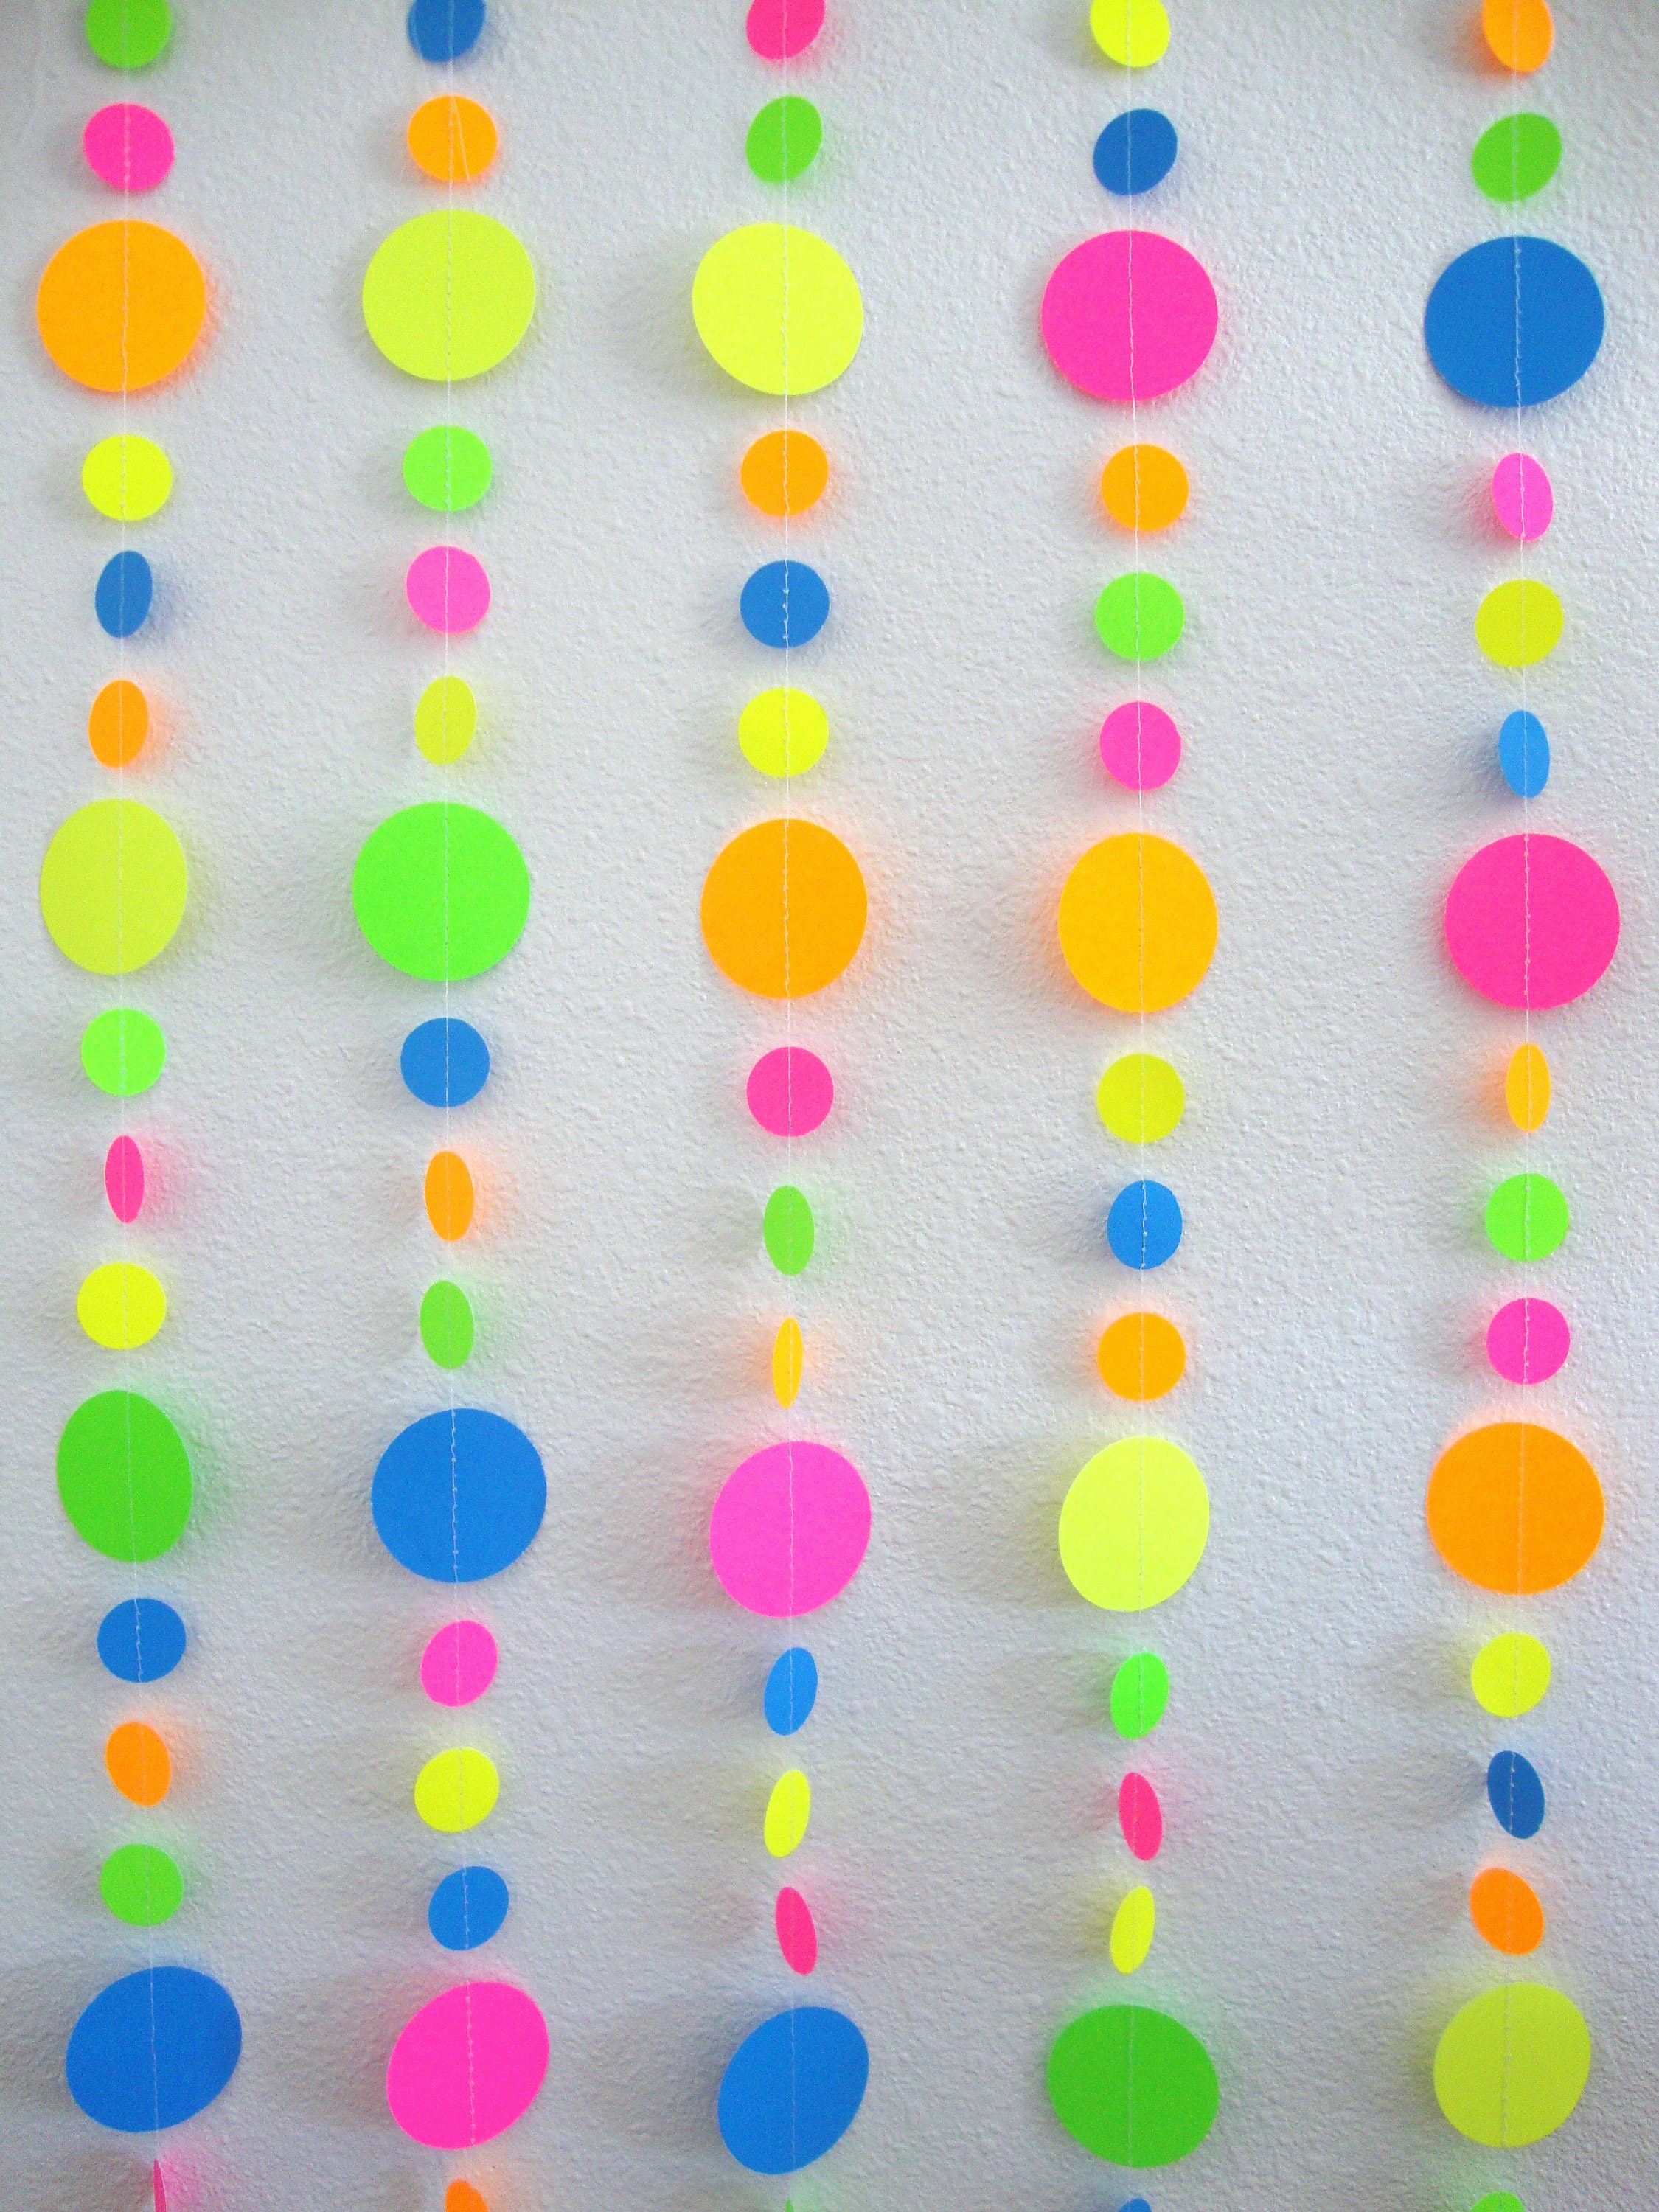 Great Choice Products Neon Paper Circles Garland Rave Black Light Birthday  Decorations, Glow In The Dark